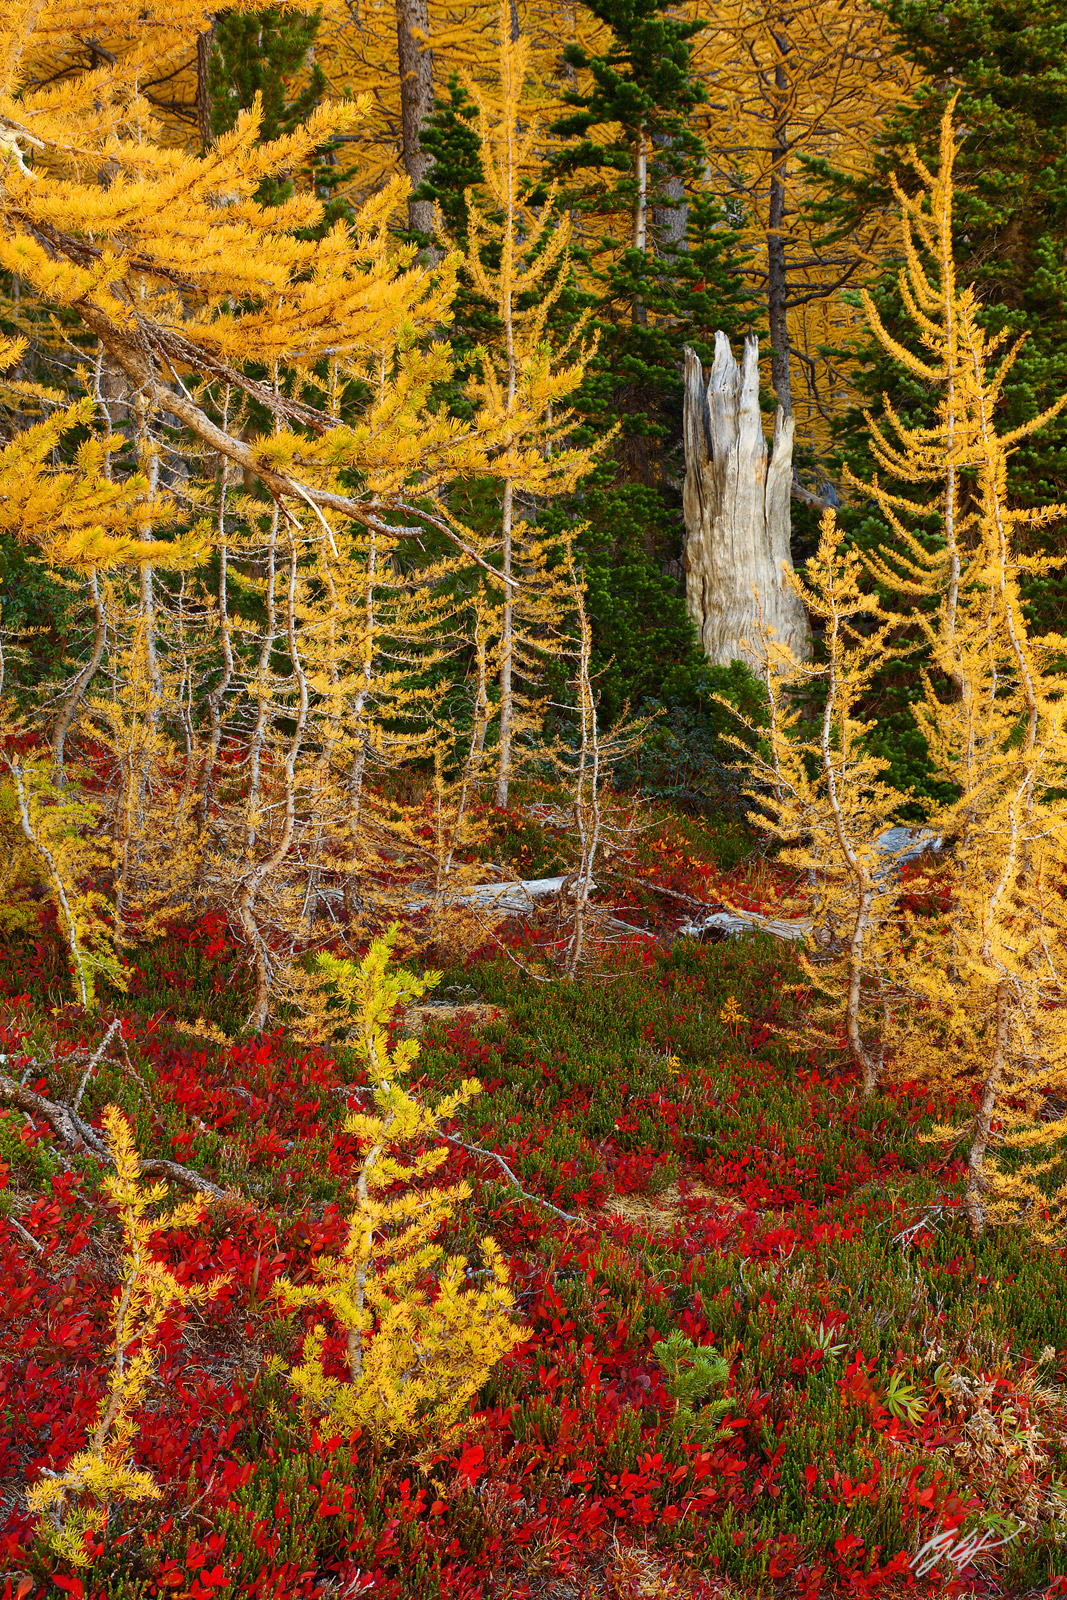 Golden Larch in the Enchanted Forest in the Enchantments in the Alpine Lakes Wilderness in Washington